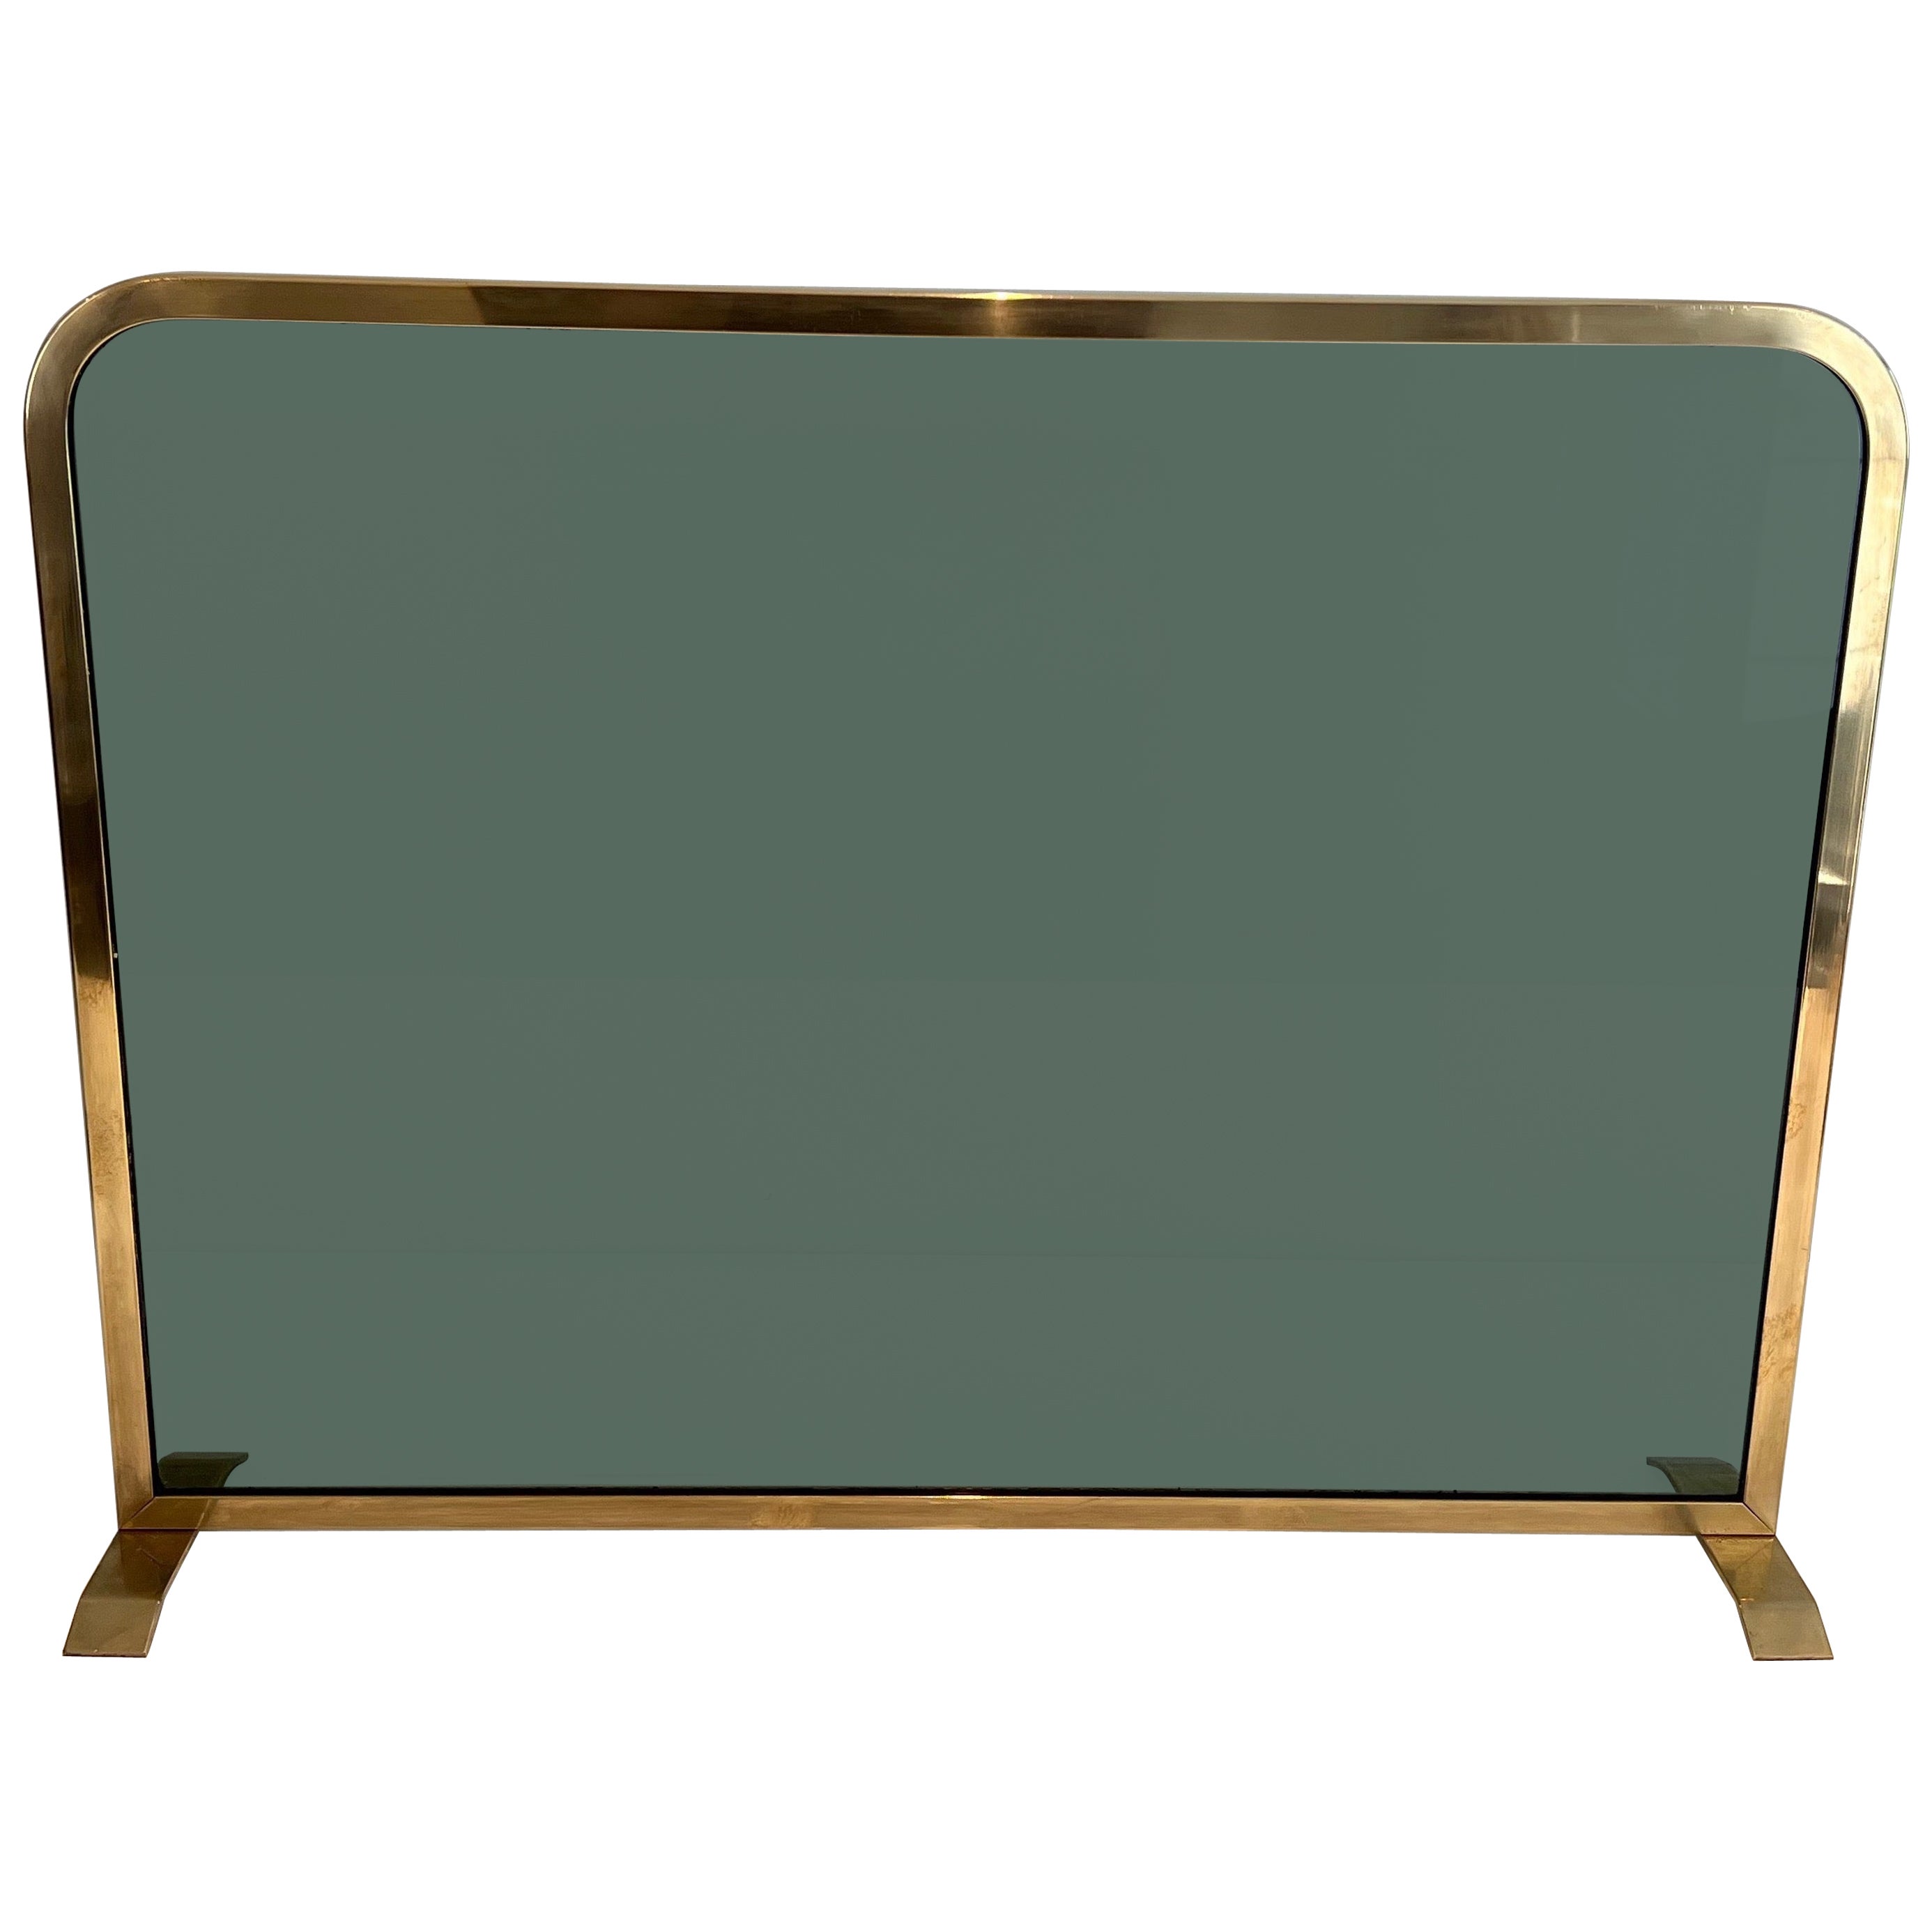 Fireplace Screen Made of a Greenish Glass Panel Surrounded by a Brass Frame For Sale